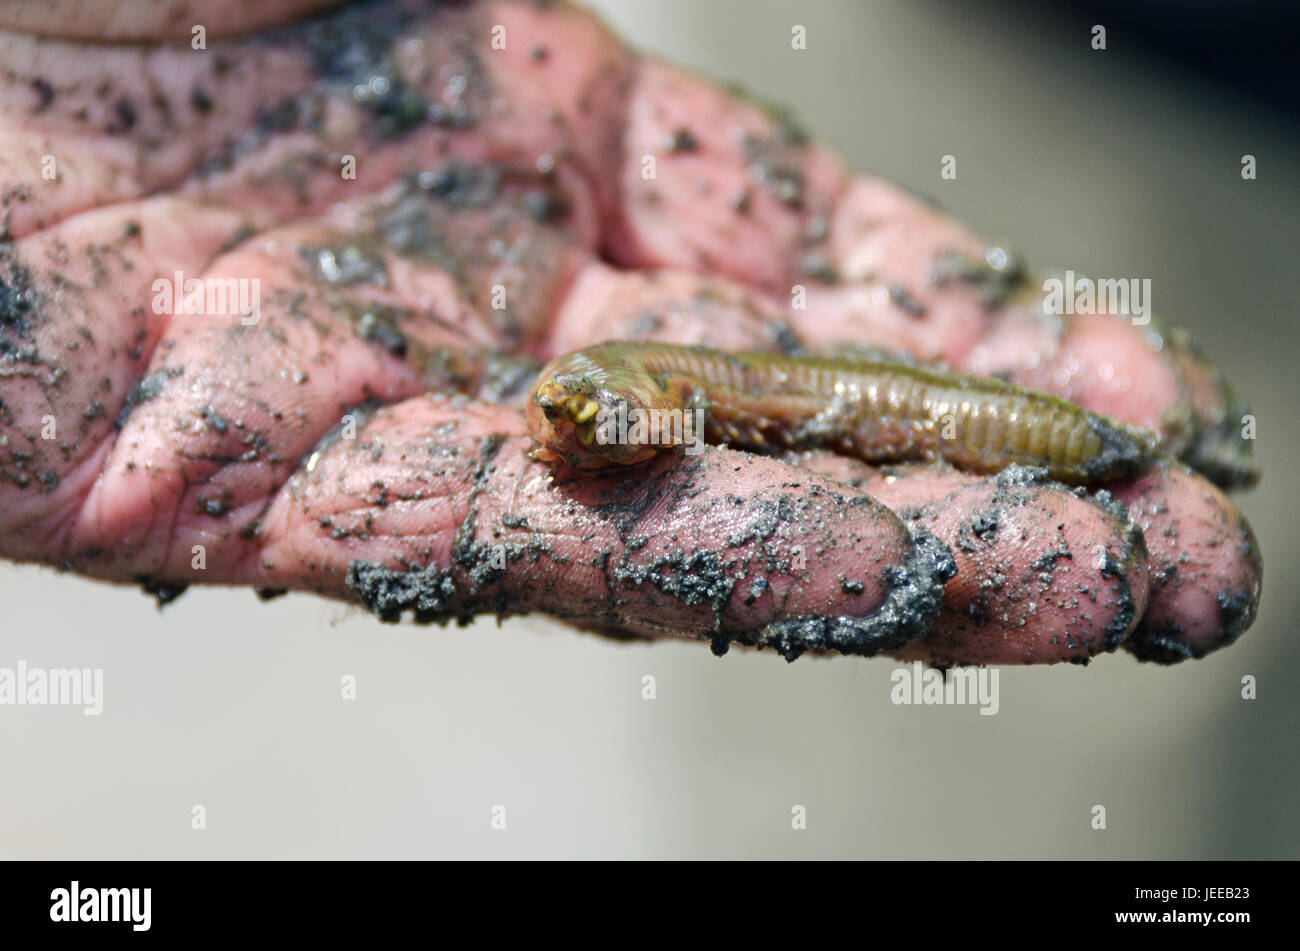 Hand holding a sandworm (Nereis virens) and covered in mud. The sandworm's teeth are visible, Stock Photo